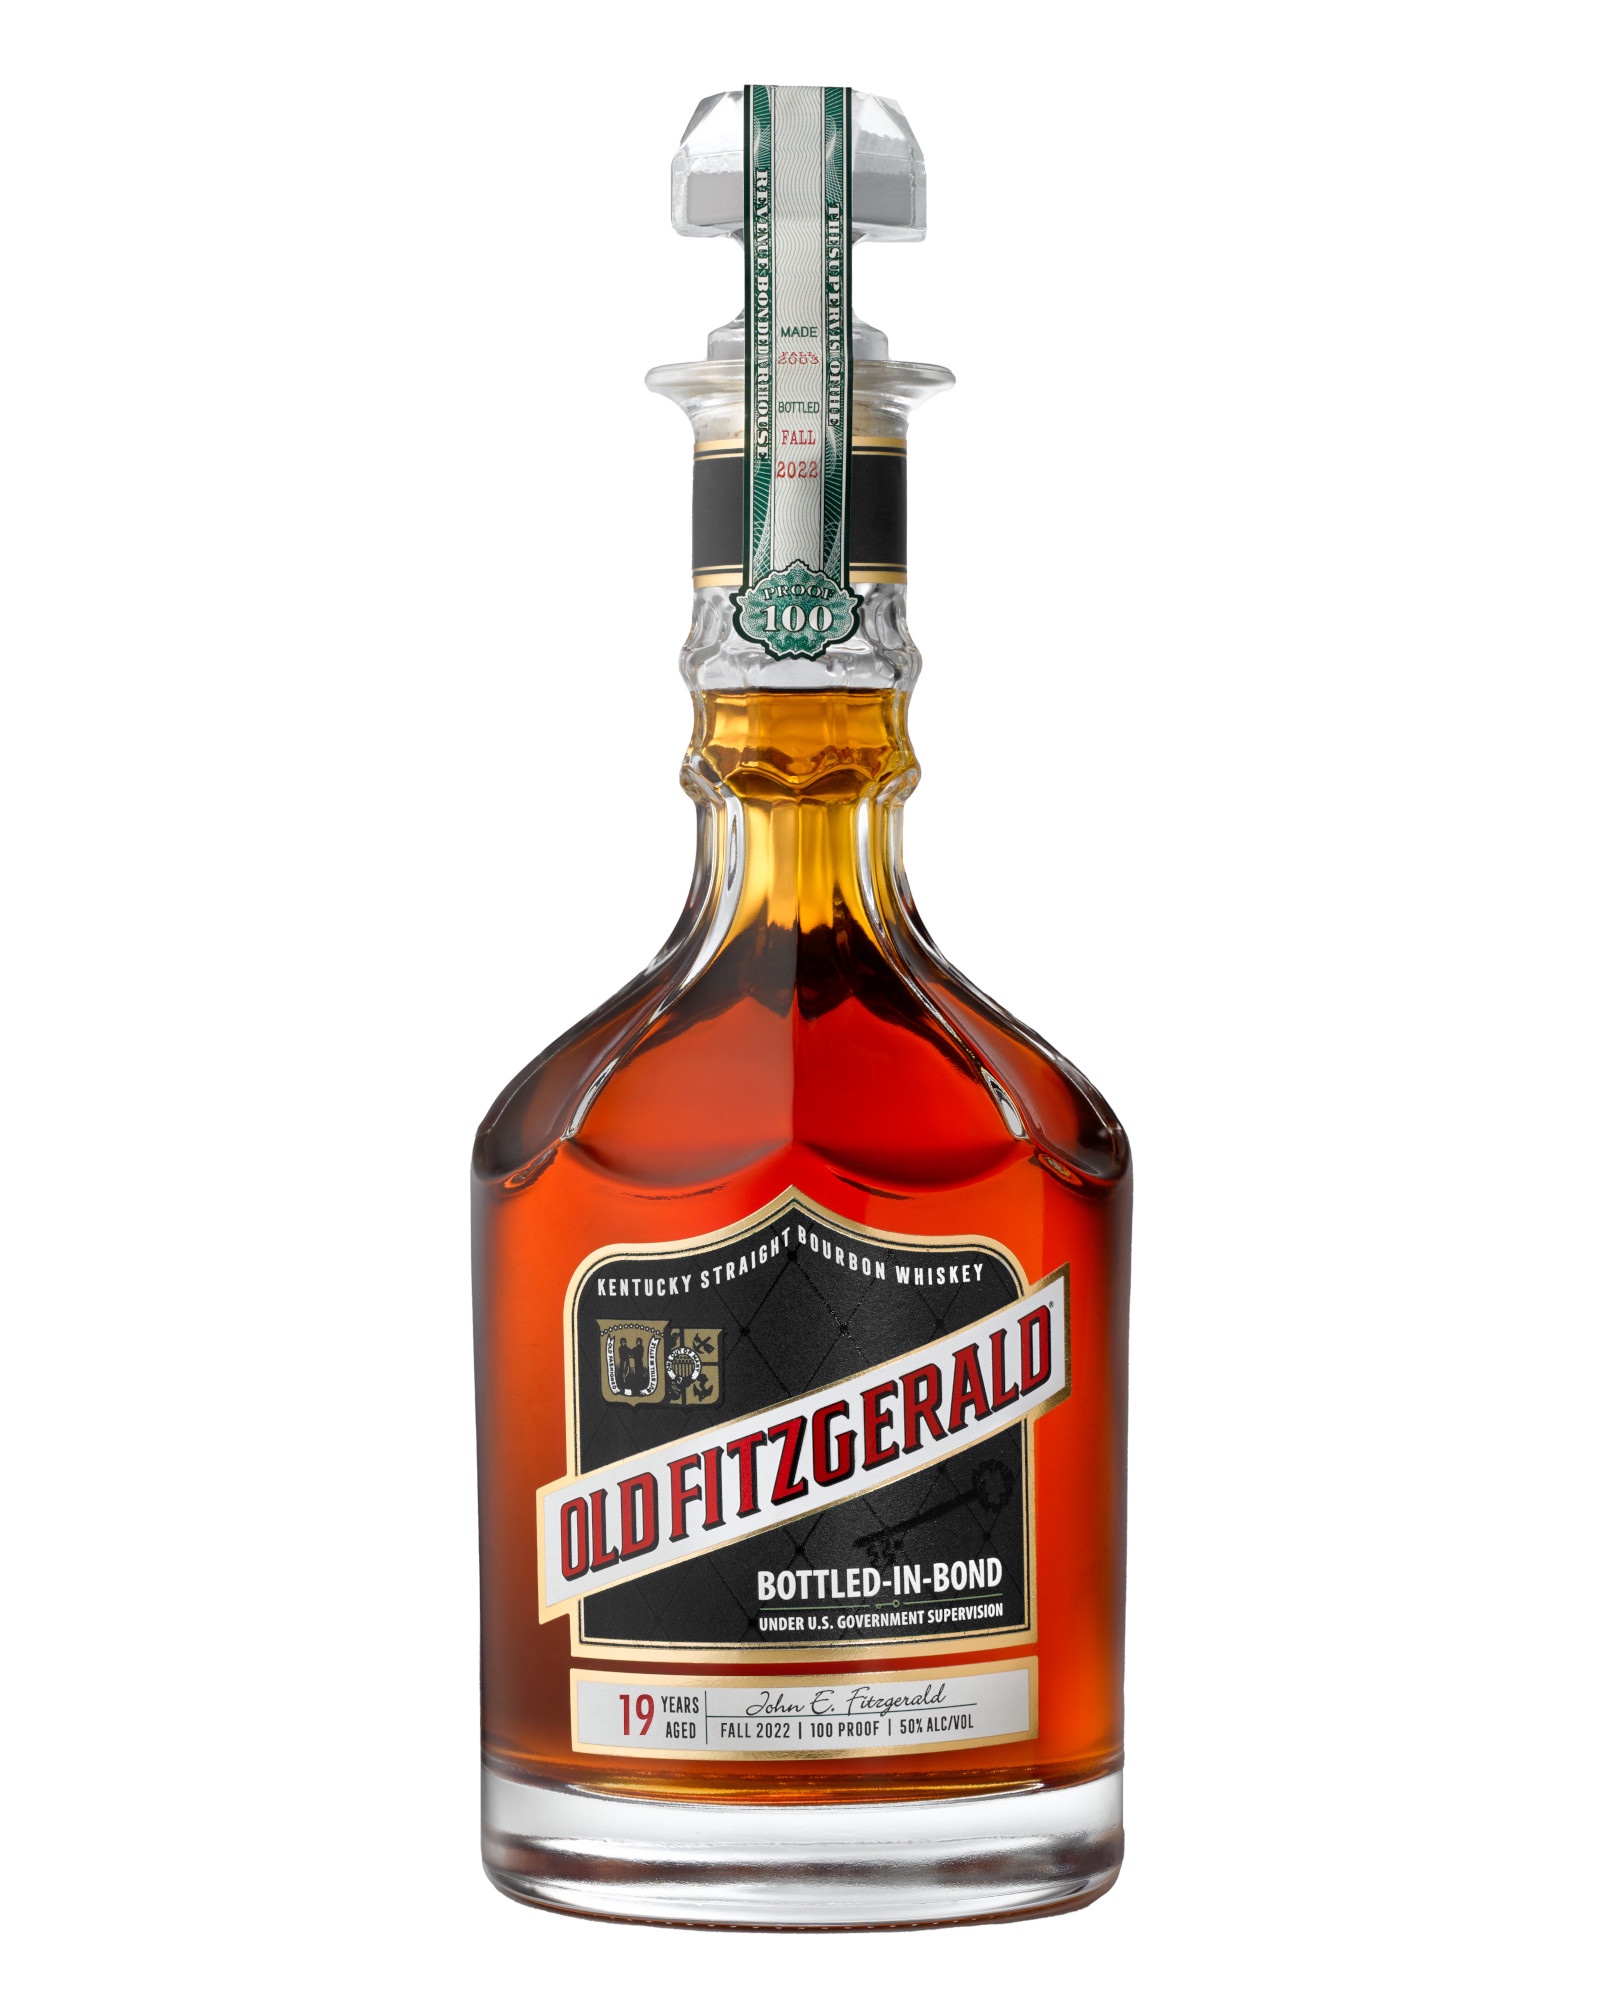 New! Old Fitzgerald Bottled In Bond Is Oldest Release To Date